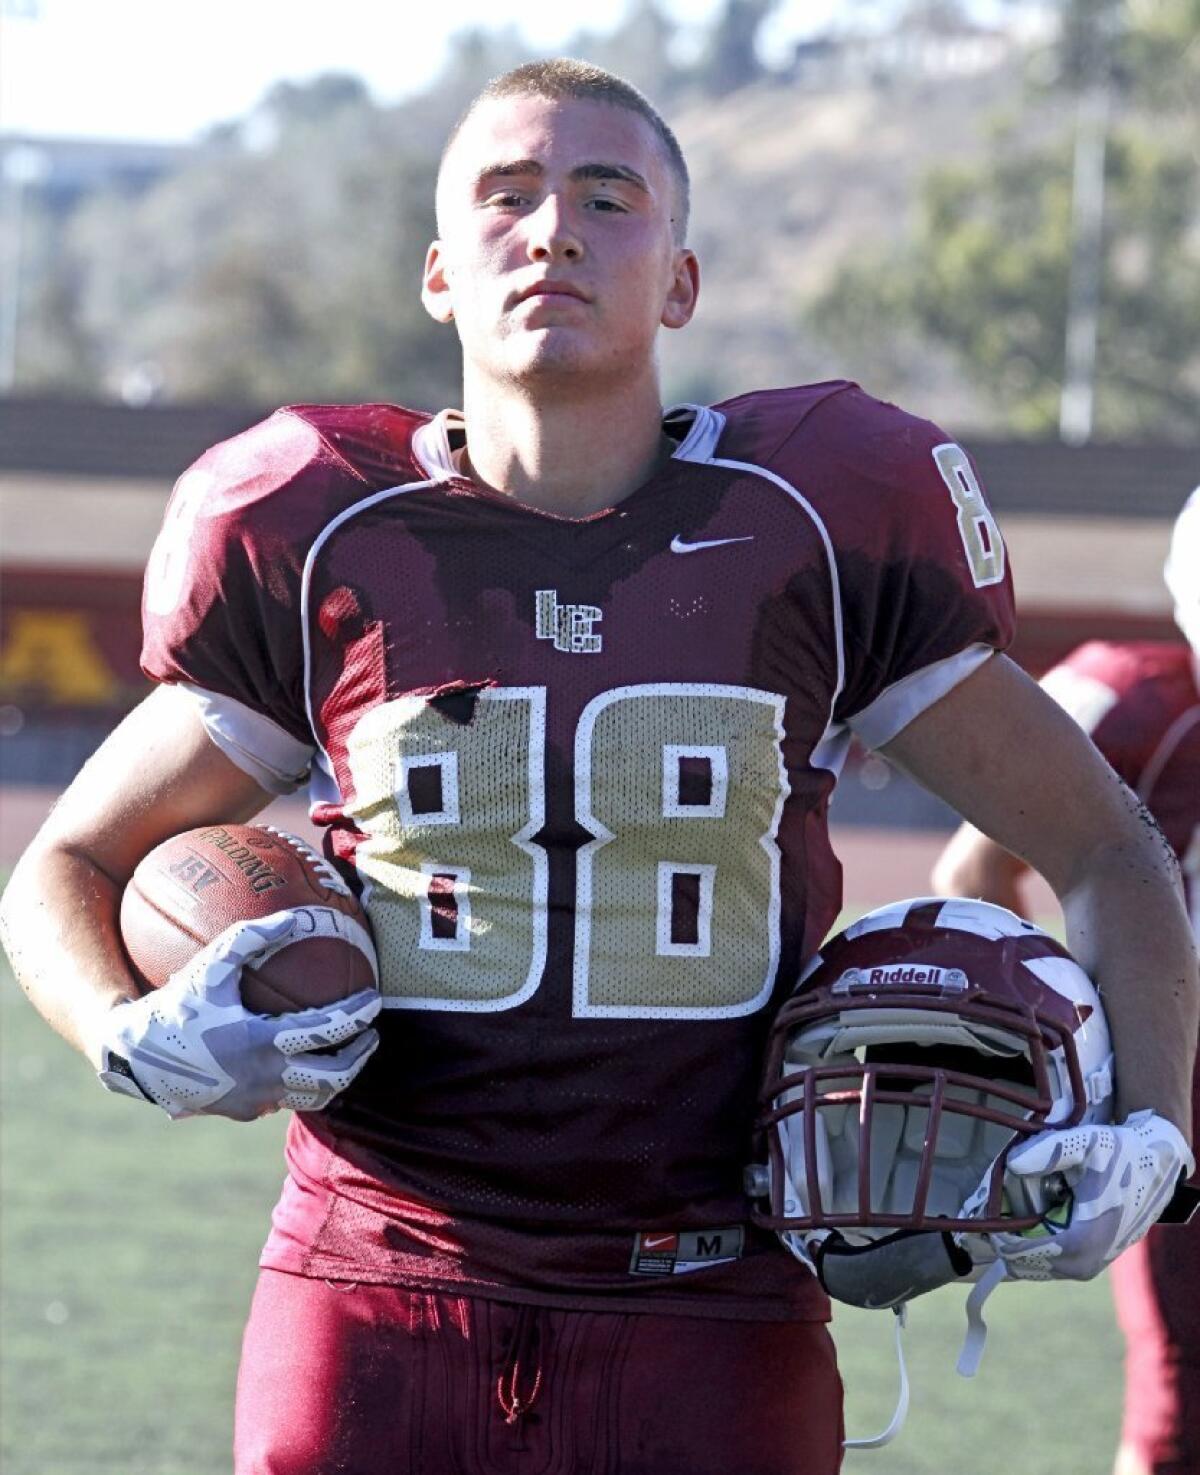 At 6-foot-3, La Cañada High tight end and defensive end Todd Murray is looking to make a big impact in his junior season.